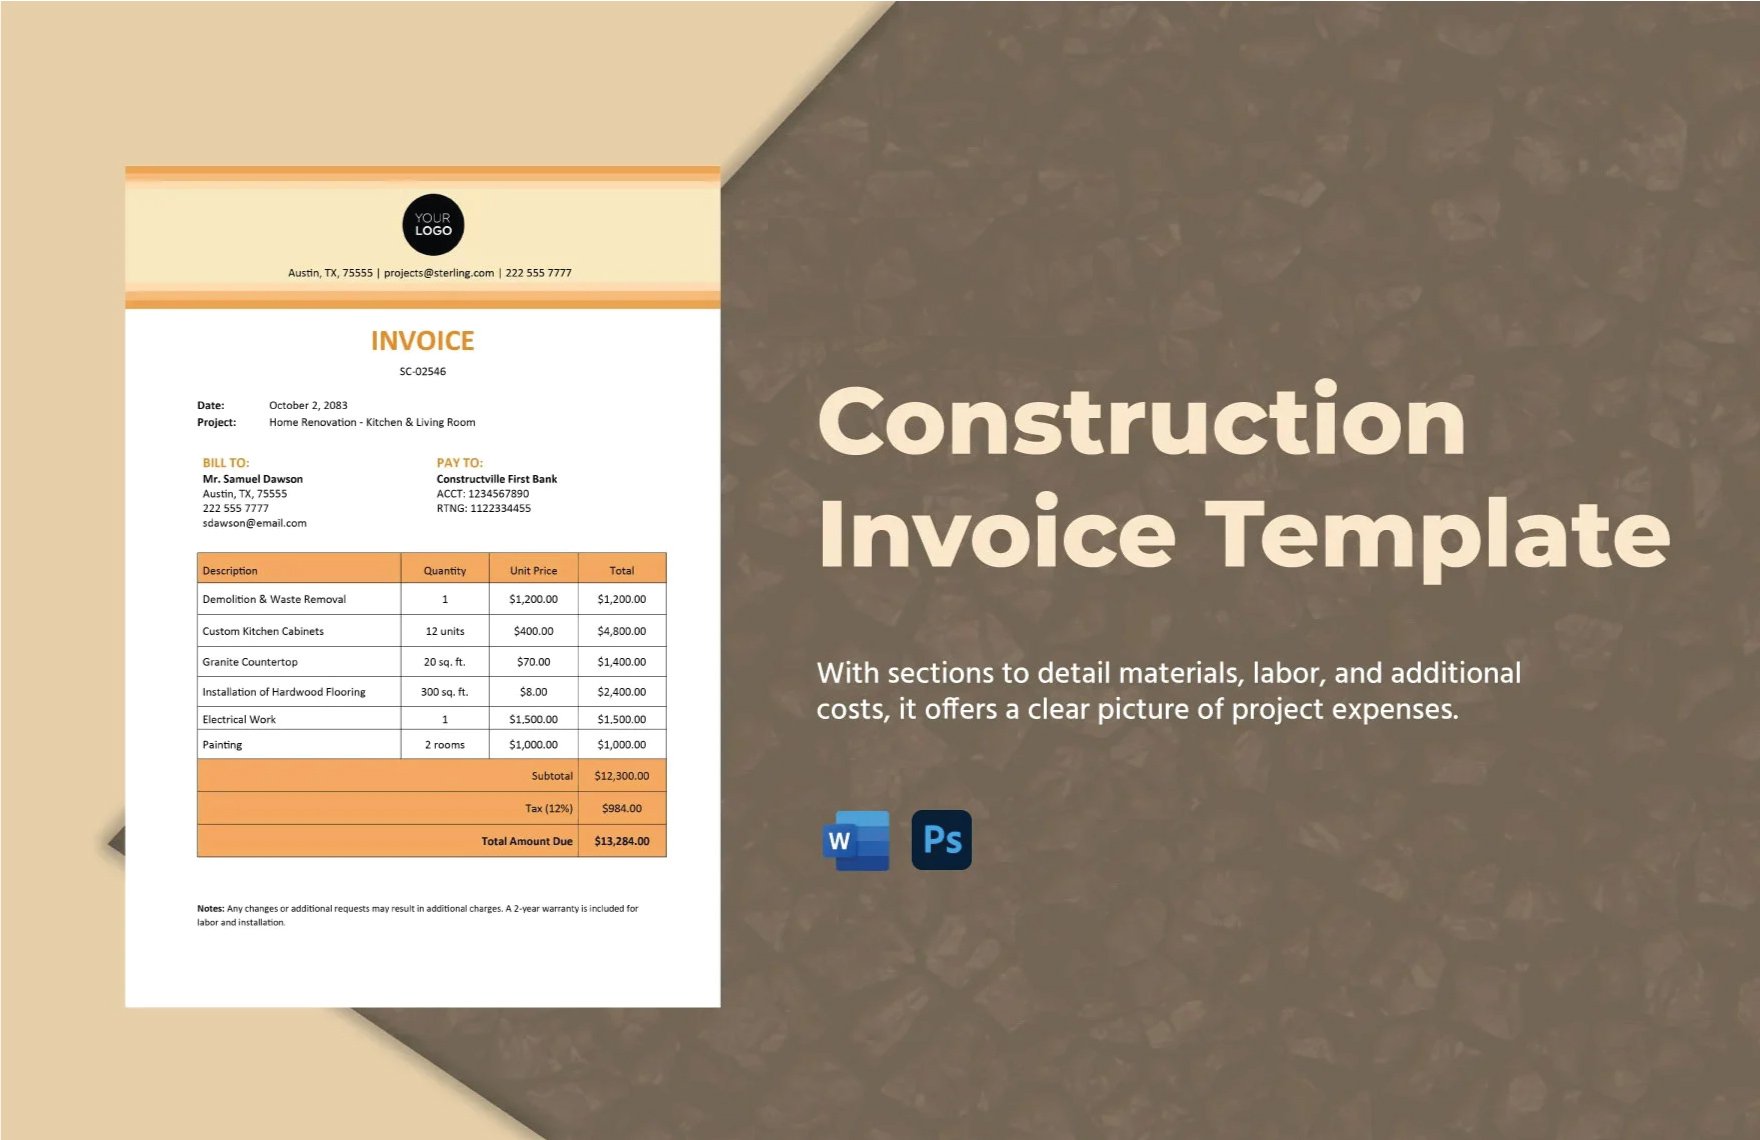 Construction Invoice Template in Word, PSD